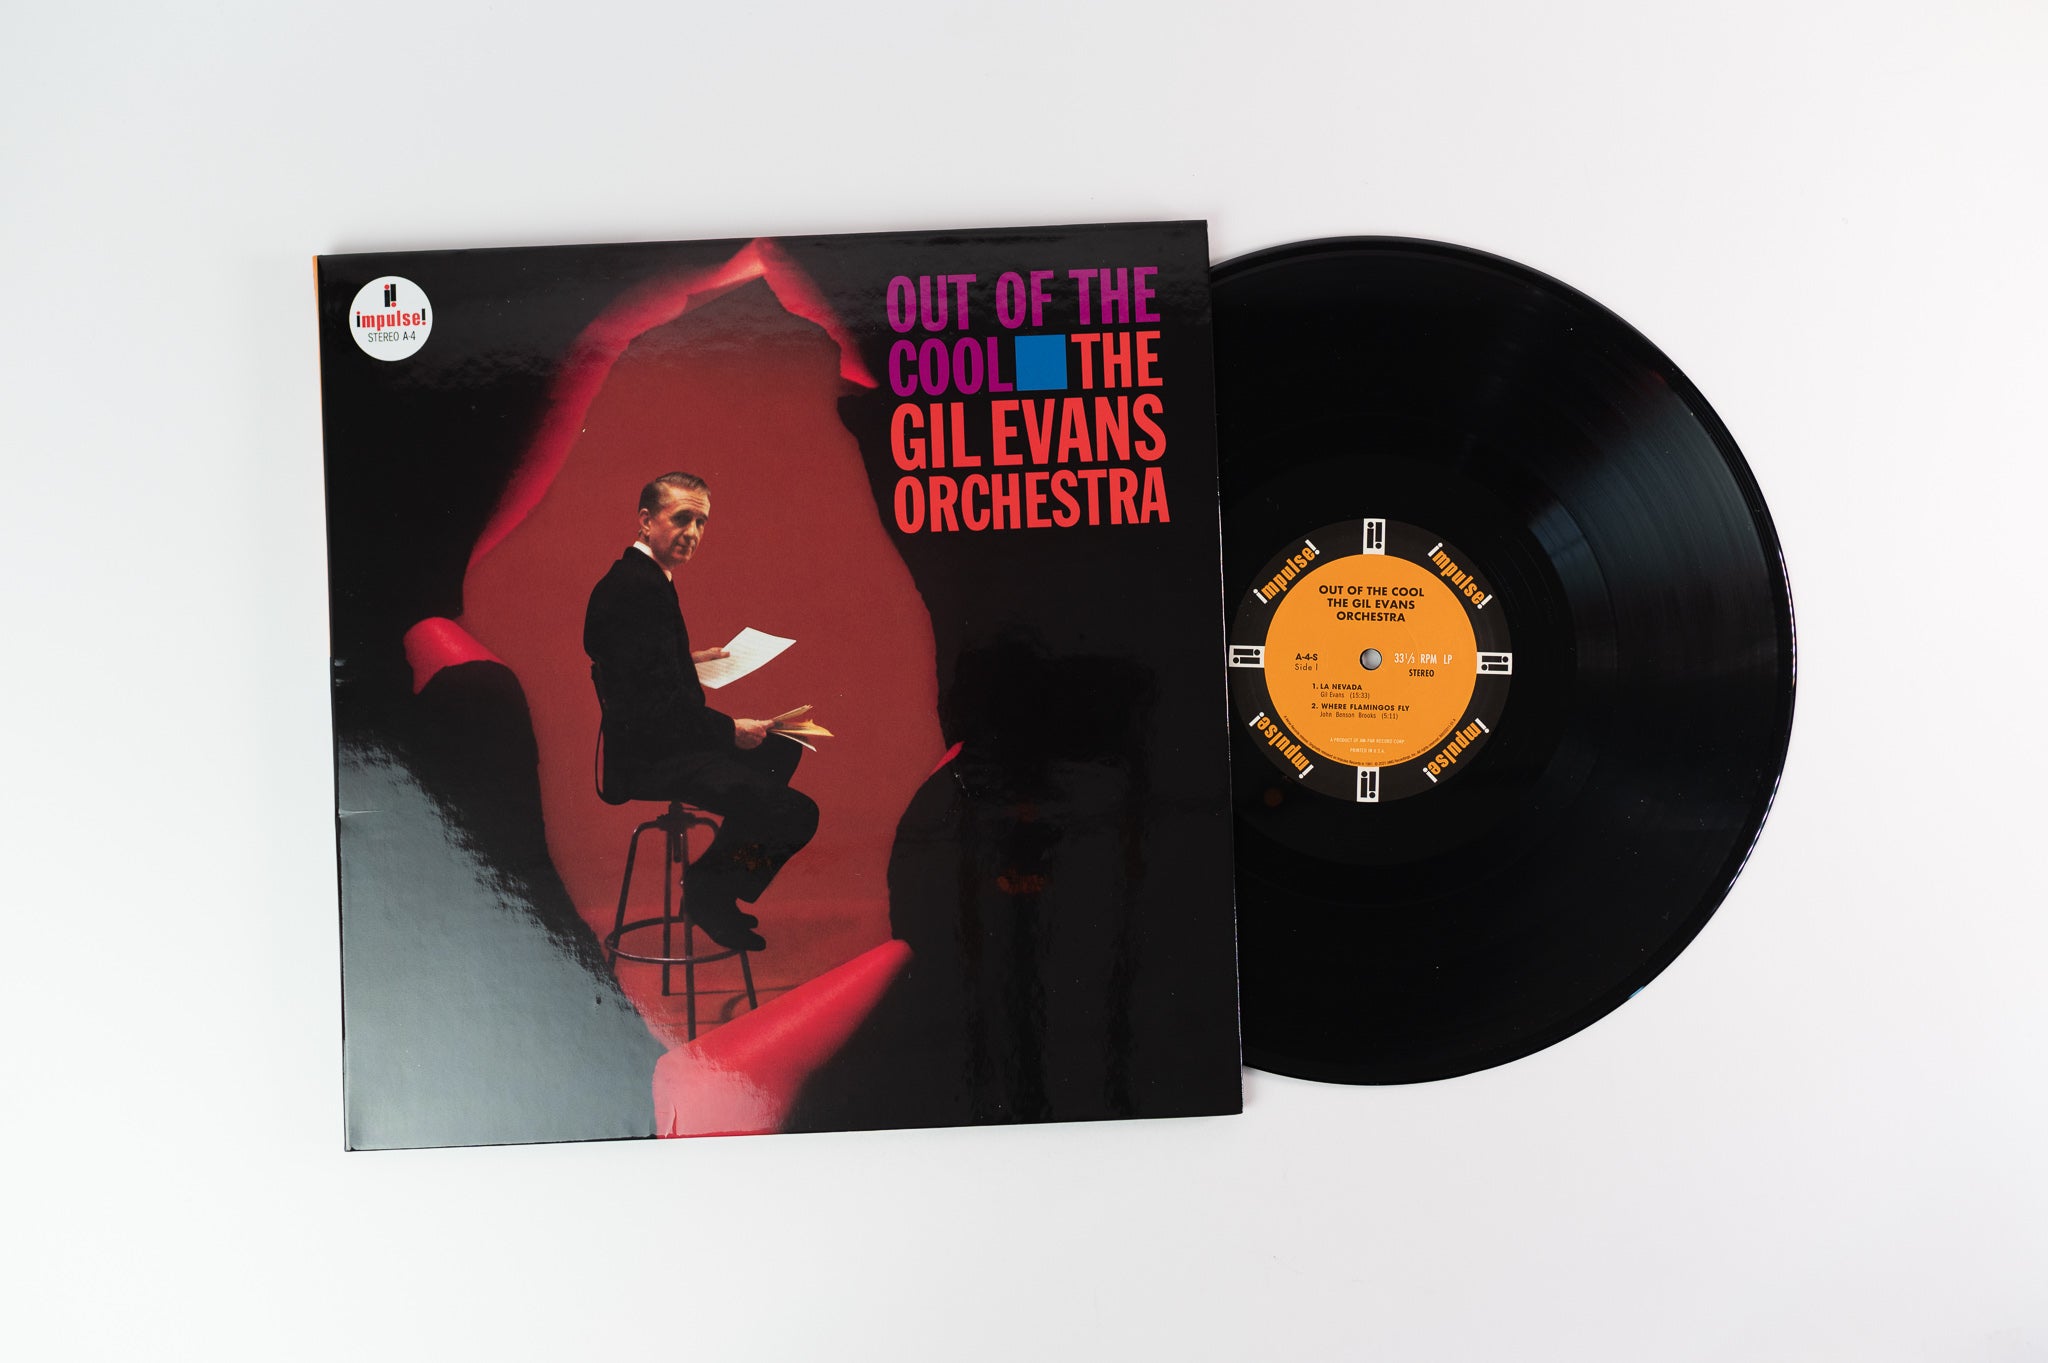 Gil Evans And His Orchestra - Out Of The Cool on Impulse Acoustic Sound Series Reissue